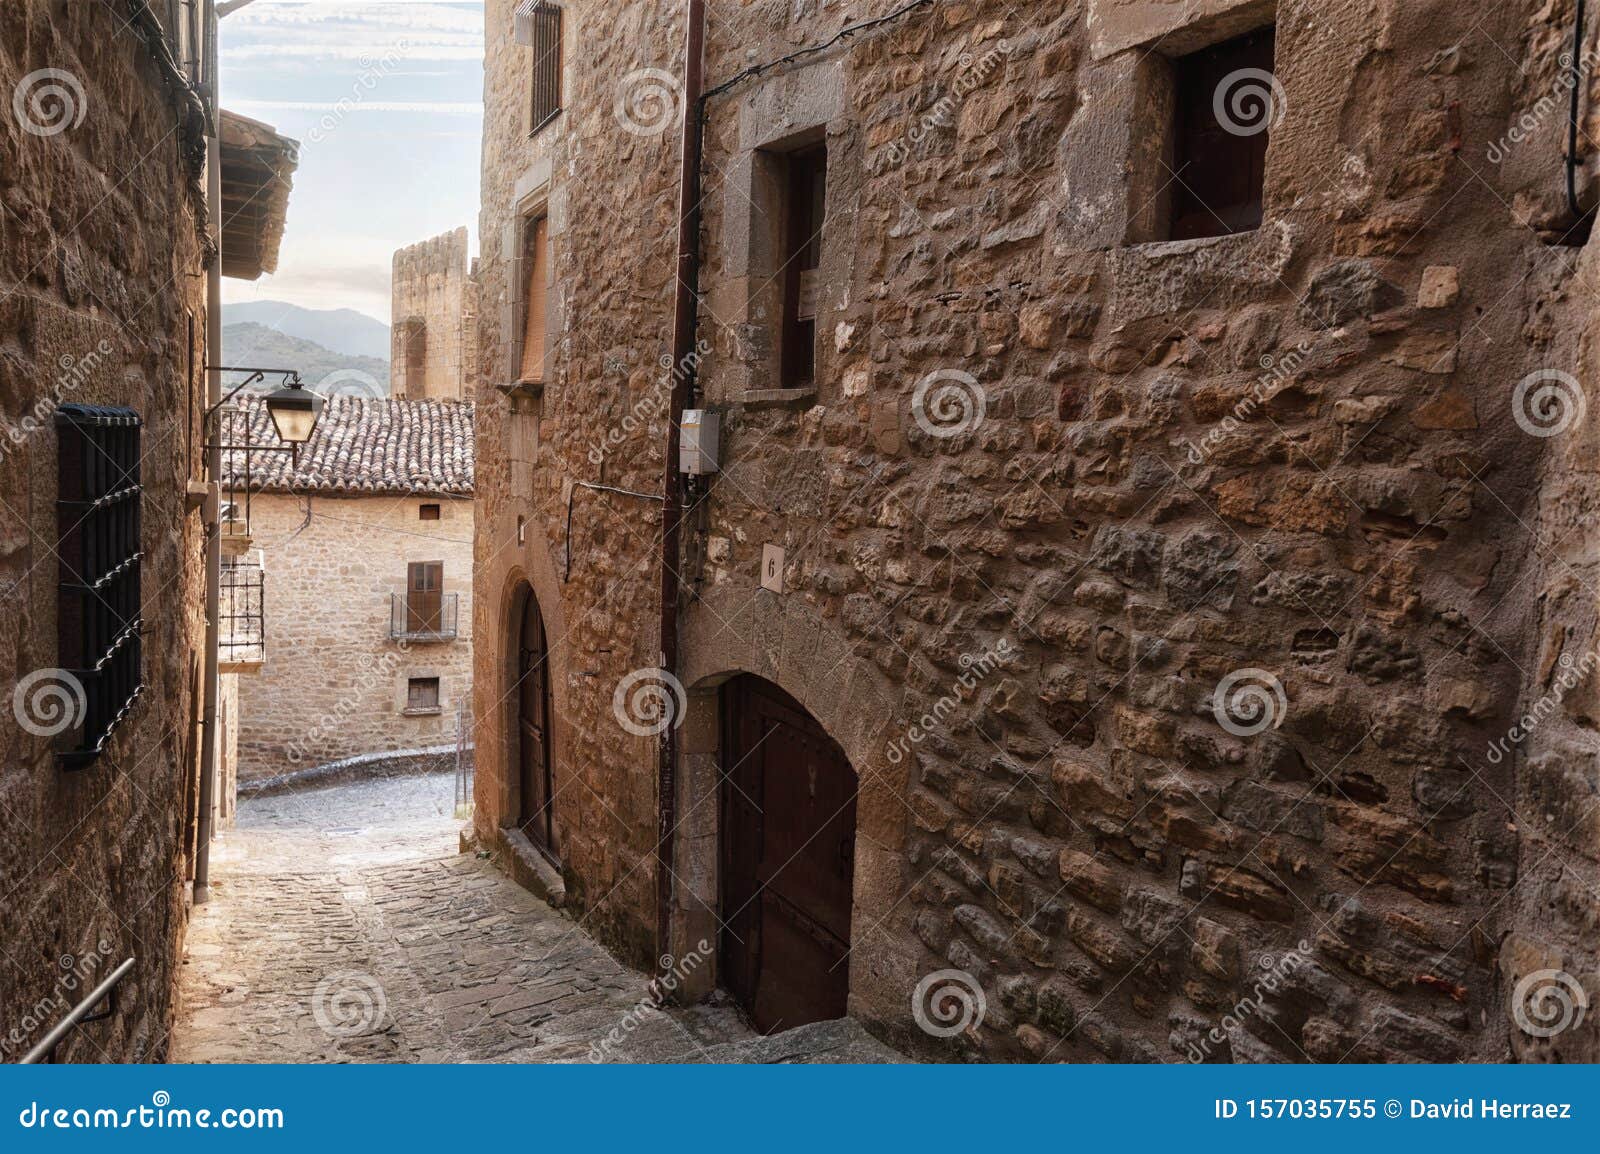 traditional medieval architecture in sos del rey catolico, aragon, spain.